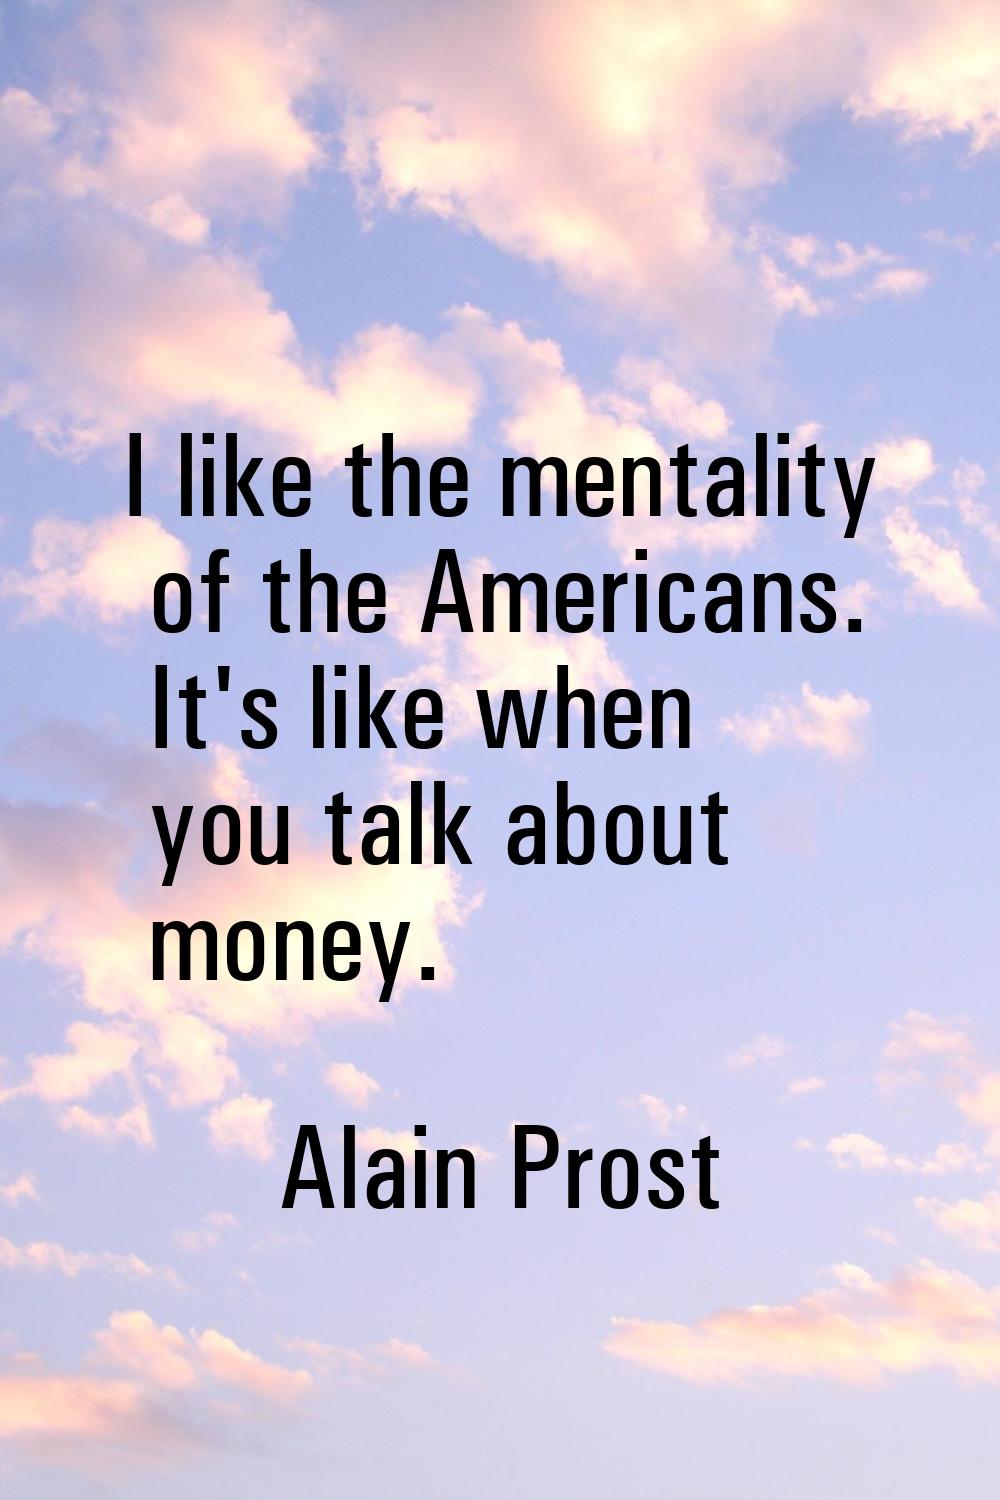 I like the mentality of the Americans. It's like when you talk about money.